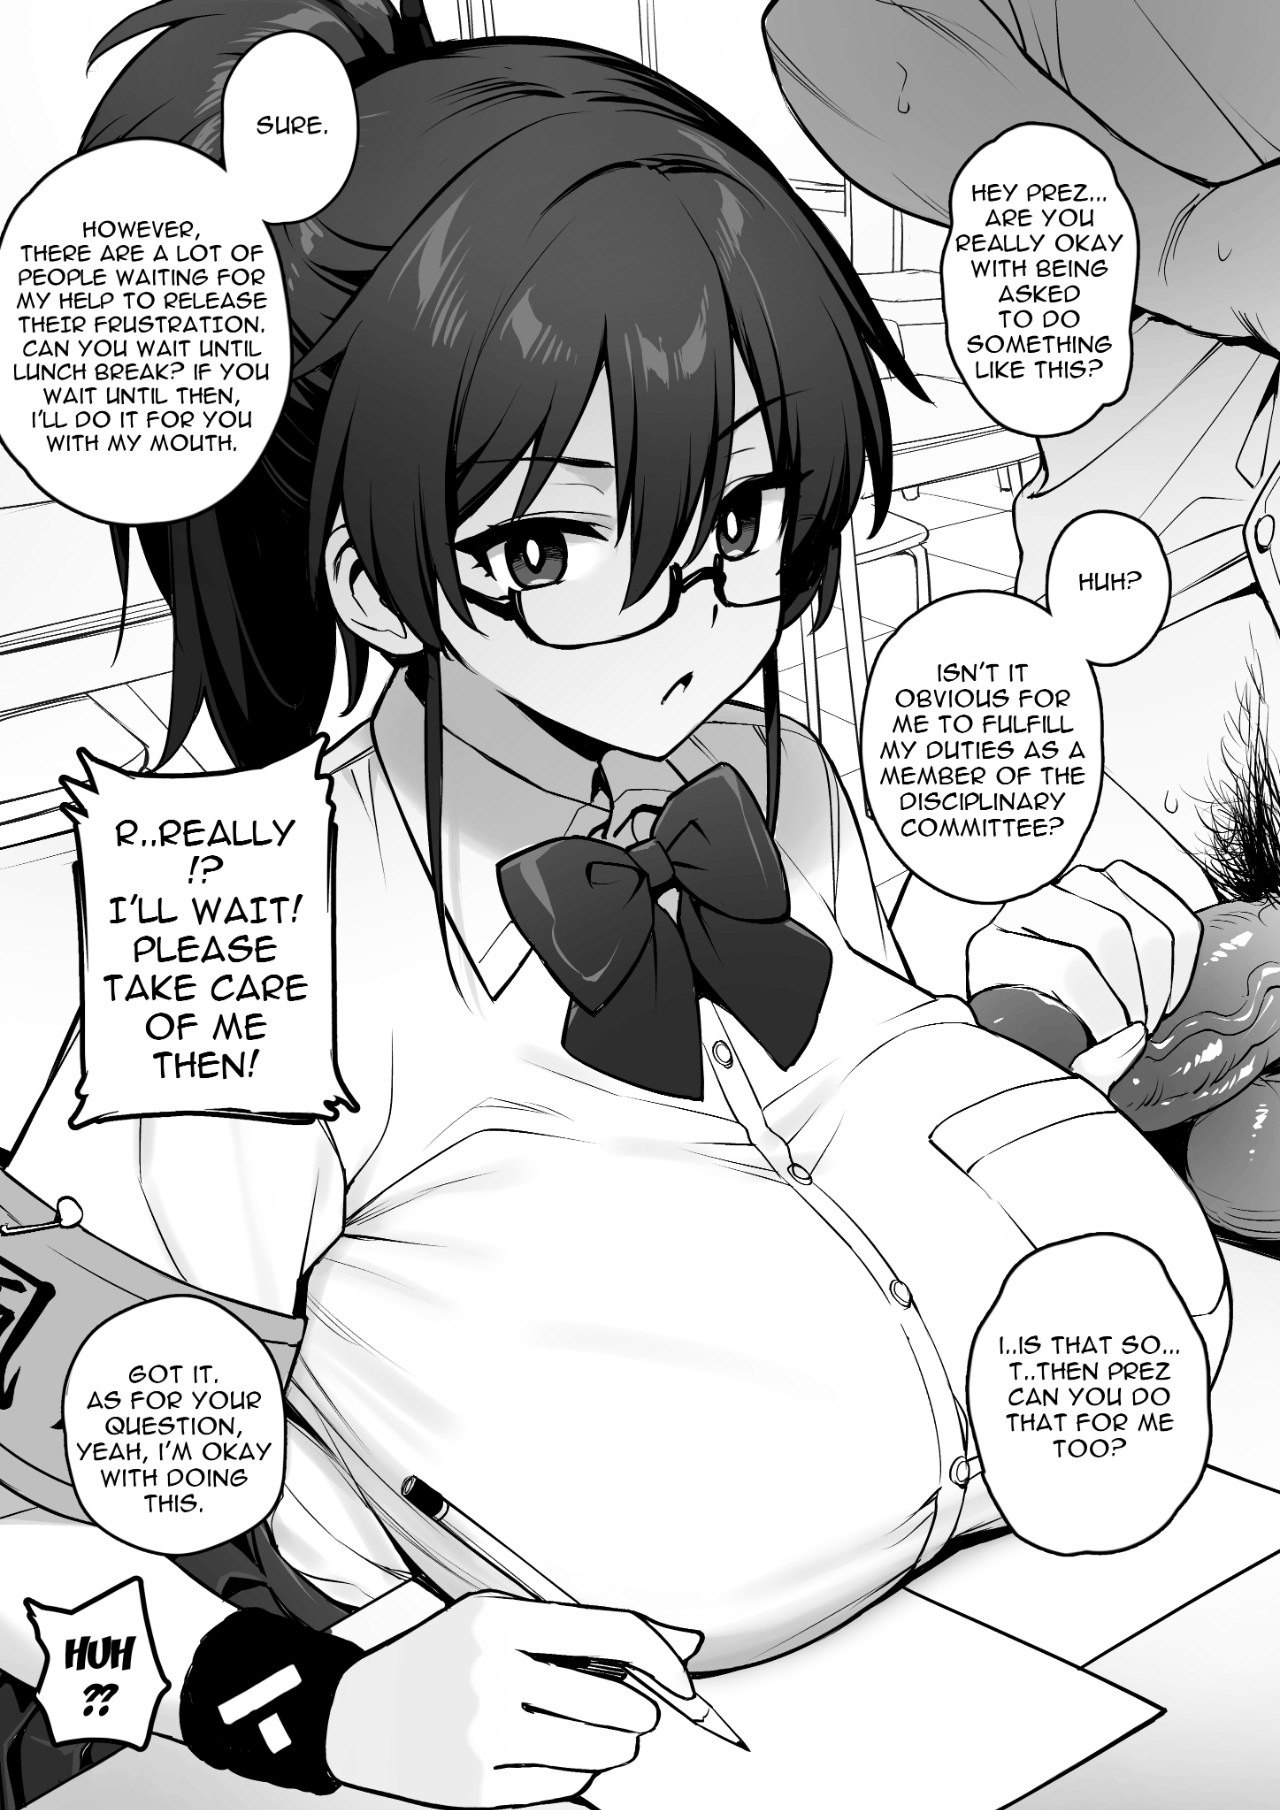 Rumor Has It That The New President Of The Disciplinary Committee Has a Huge Rack Porn Comic english 07